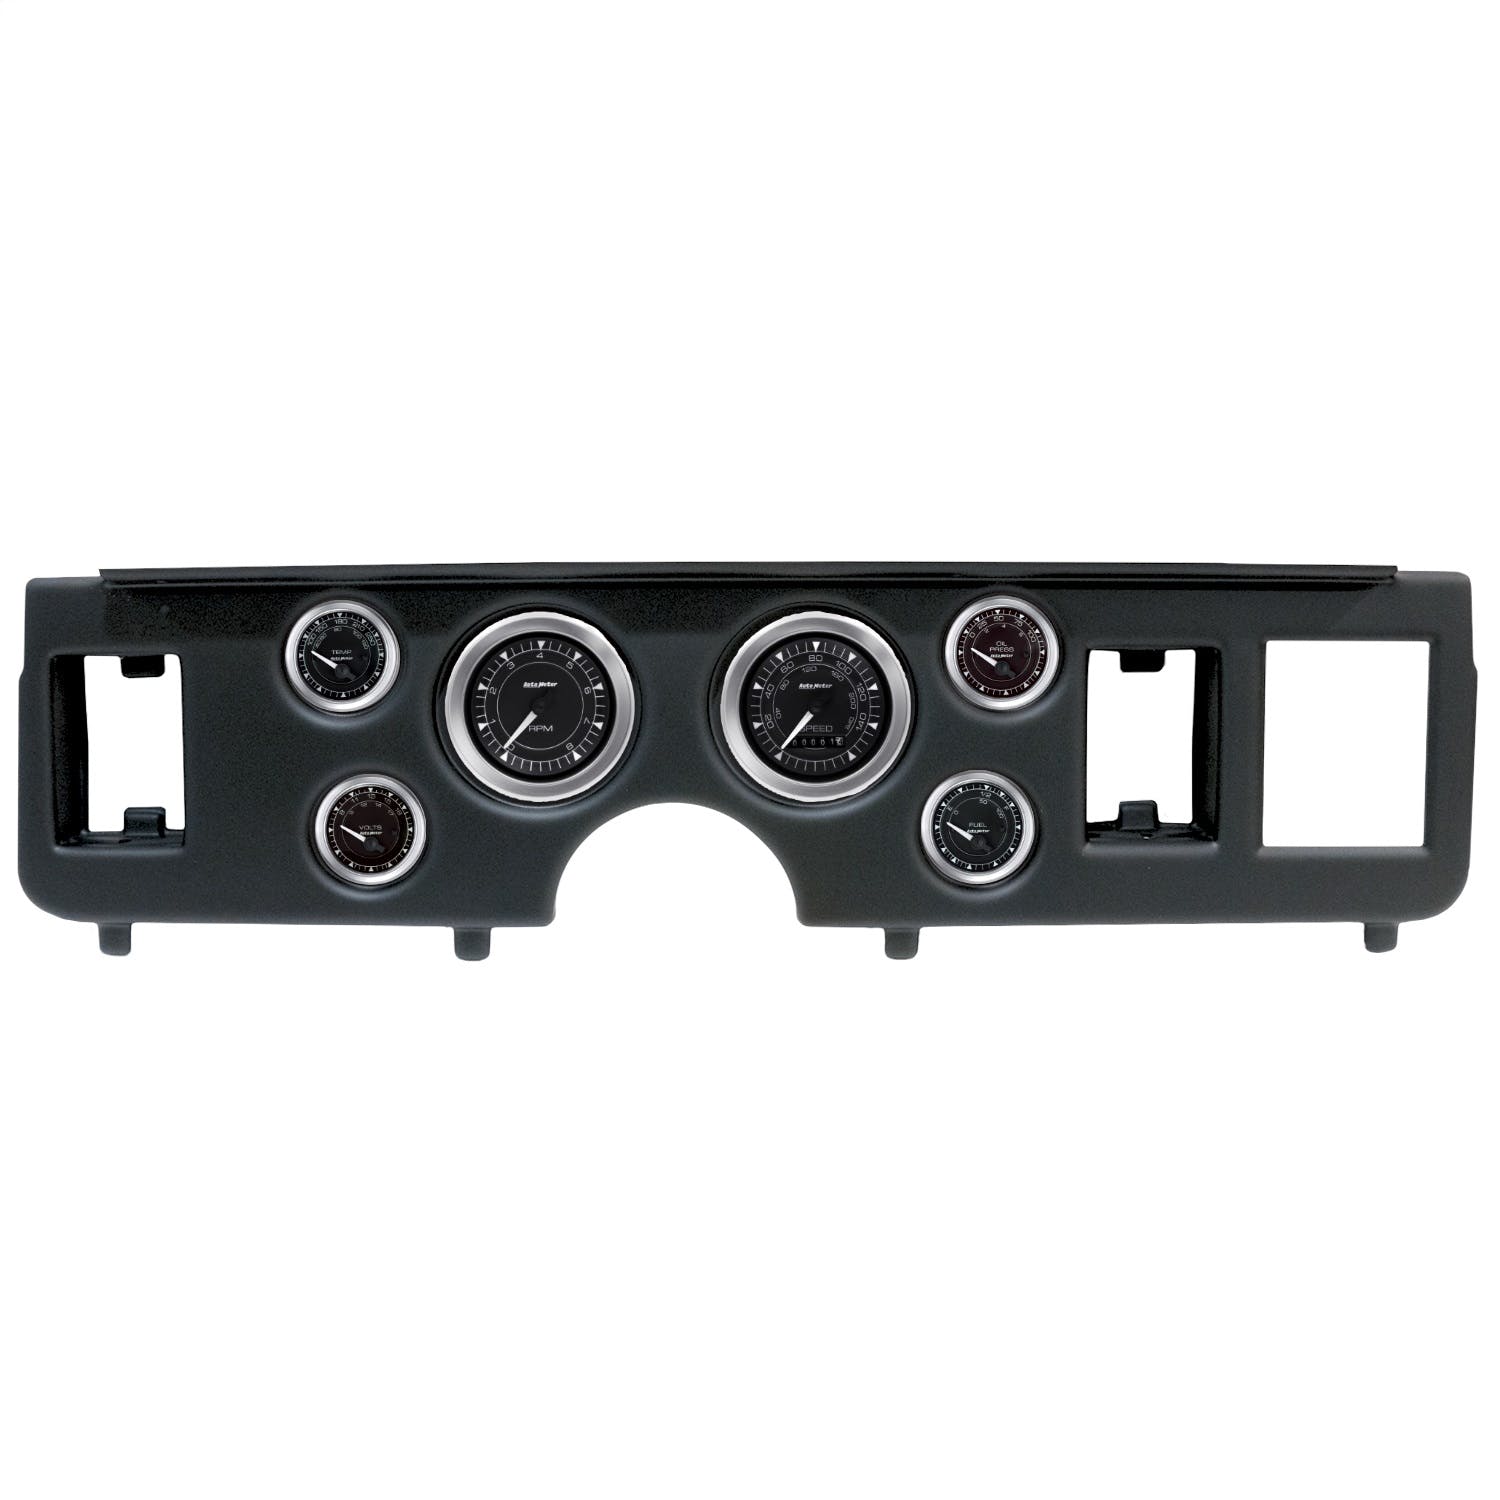 AutoMeter Products 2917-04 6 Gauge Direct-Fit Dash Kit, Ford Mustang 79-86, Chrono